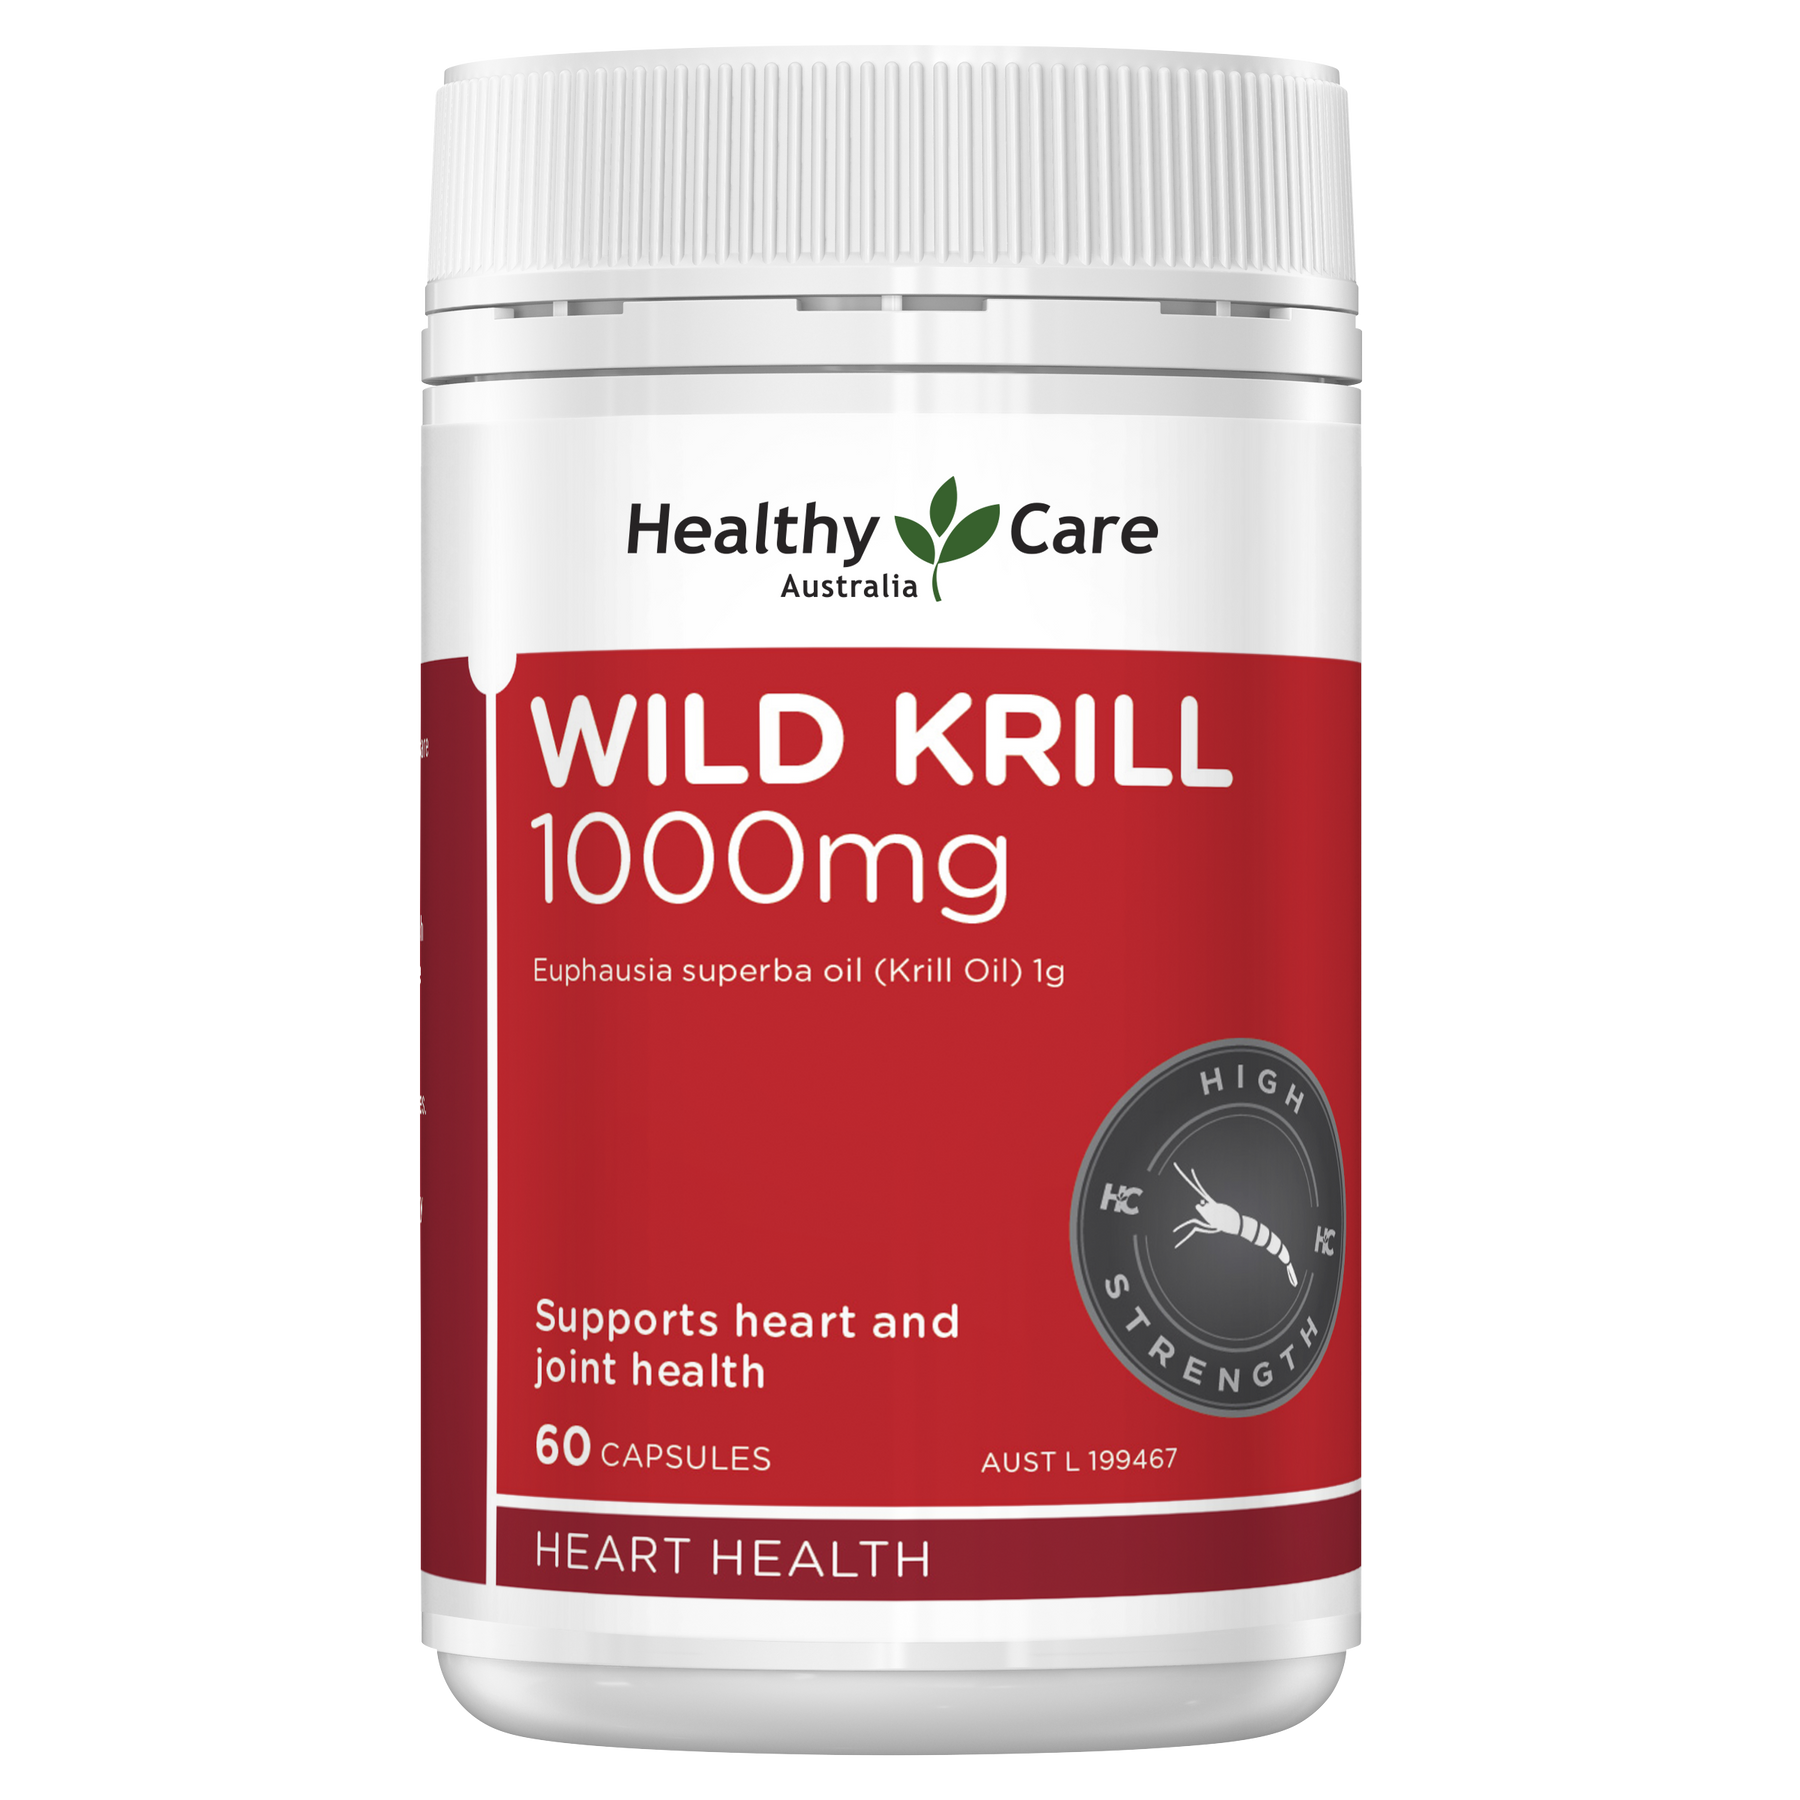 Healthy Care Wild Krill Oil 1000mg - 60 Capsules